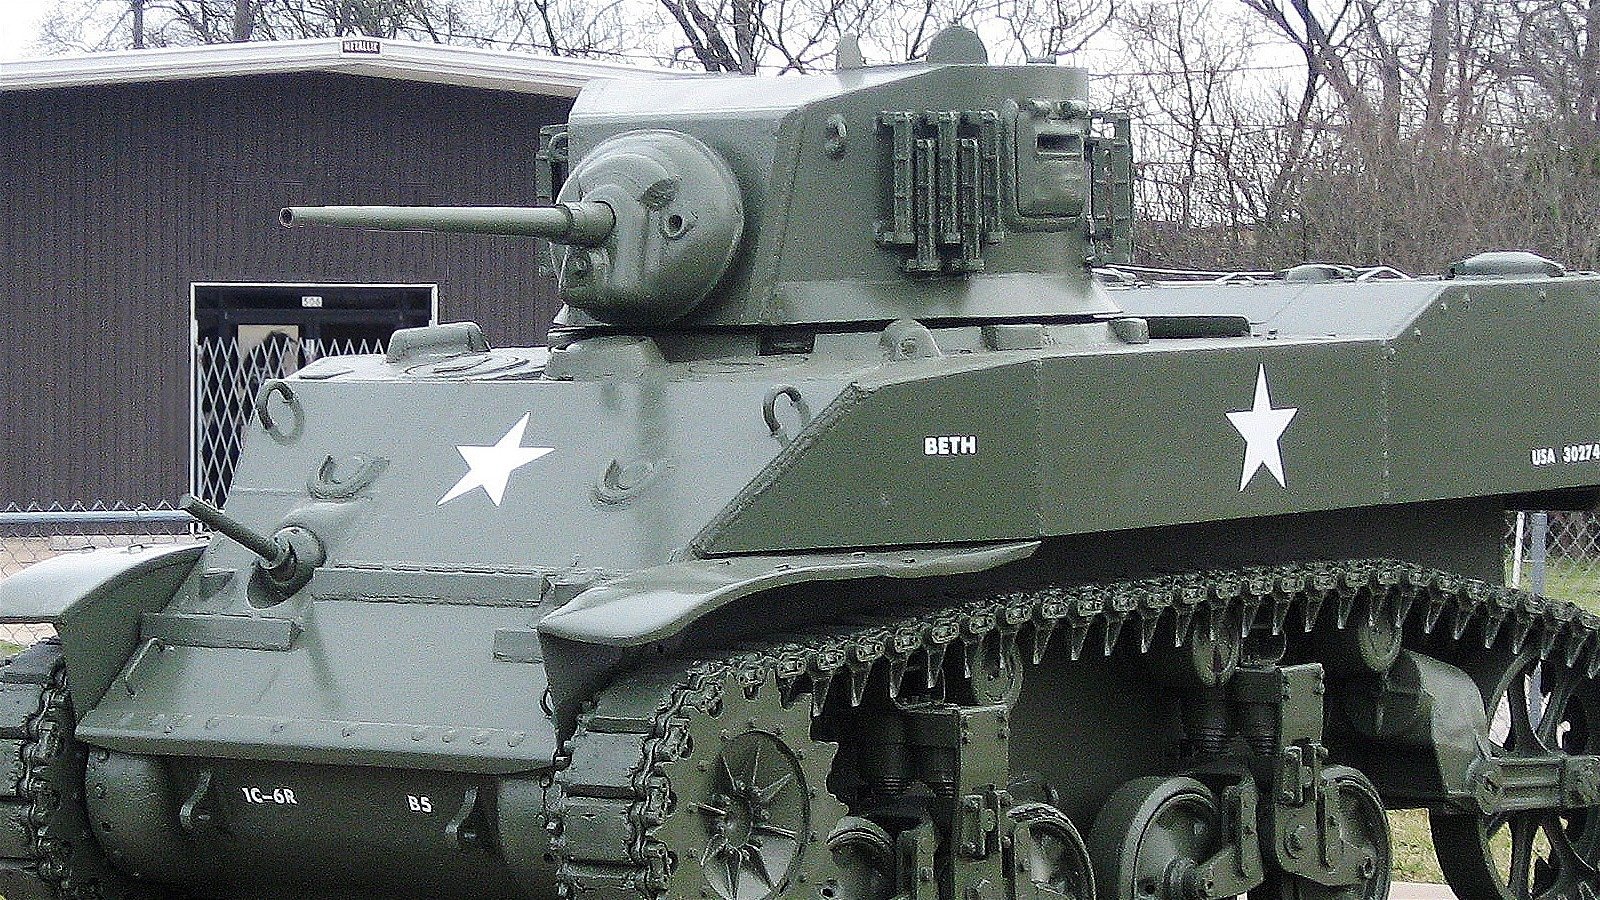 This WWII Tank Is So Good, It Served Over 70 Years